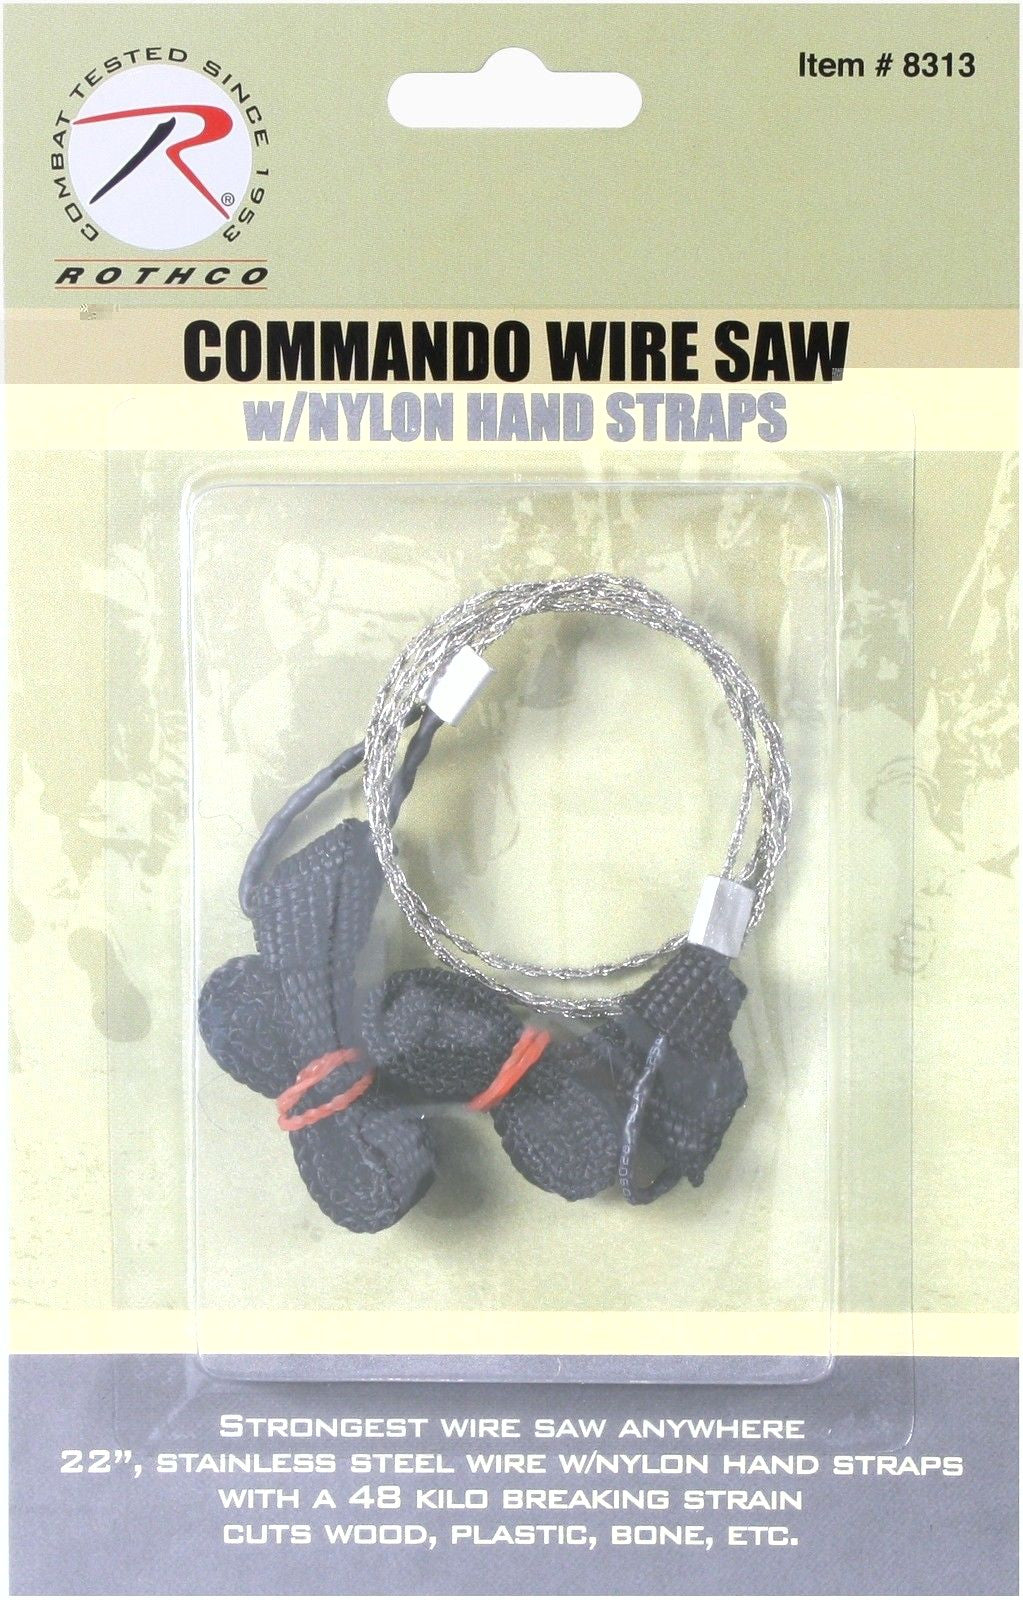 Commando Wire Saw W/ Nylon Hand Straps - Camping Hiking Survival Tactical